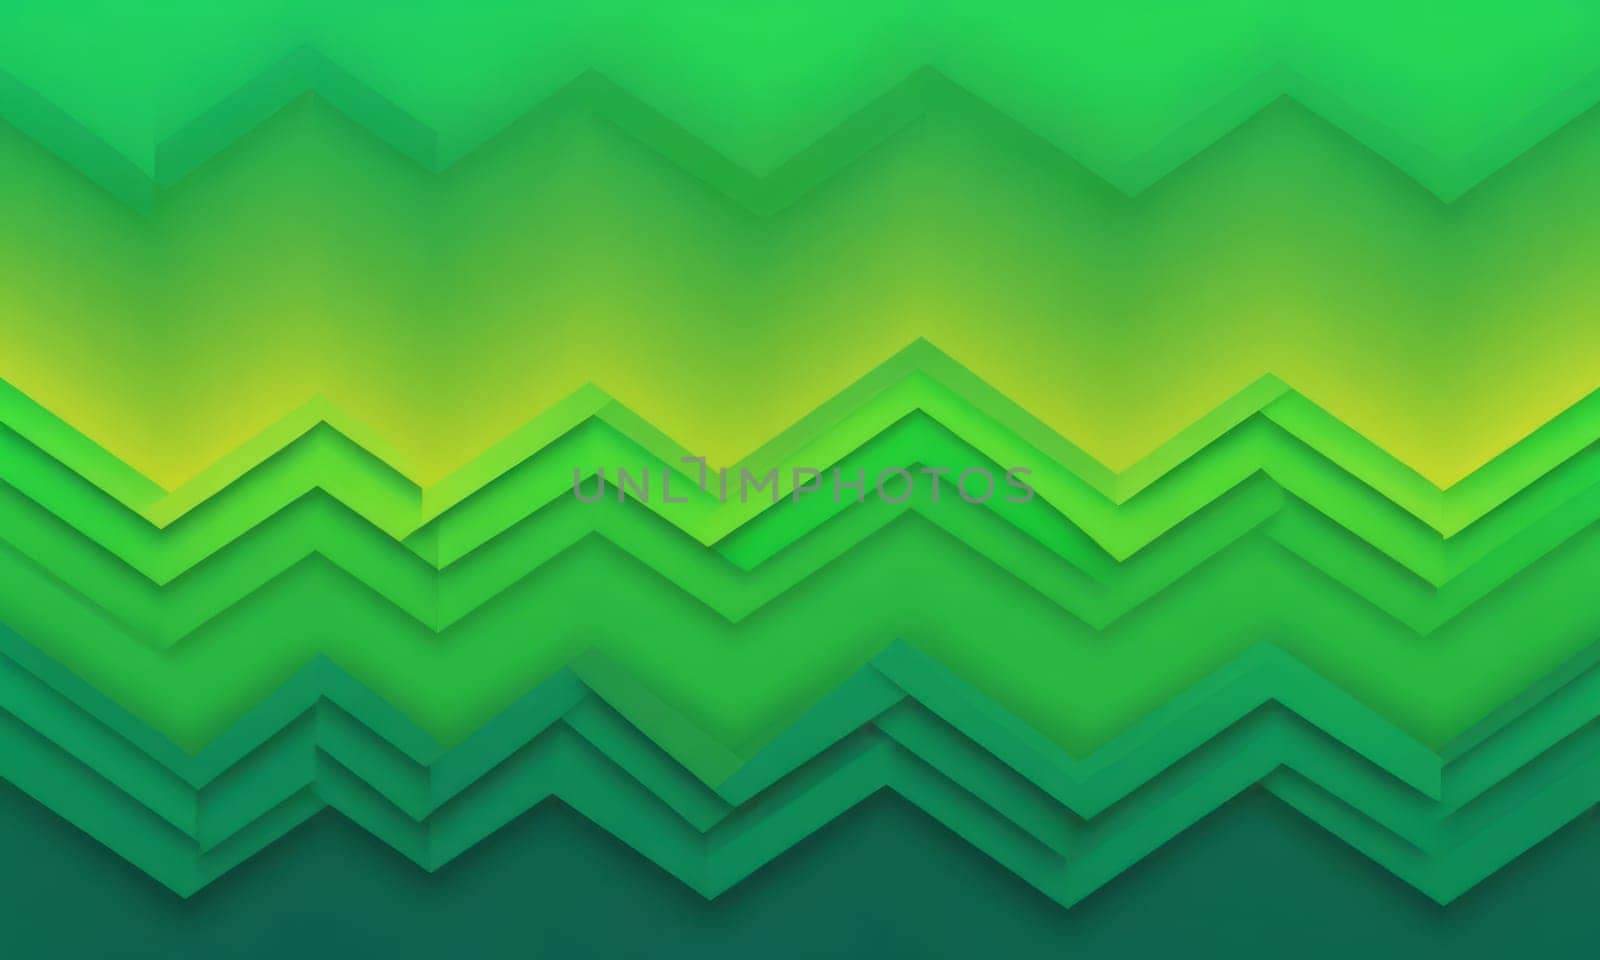 Zigzag Shapes in Green Green by nkotlyar